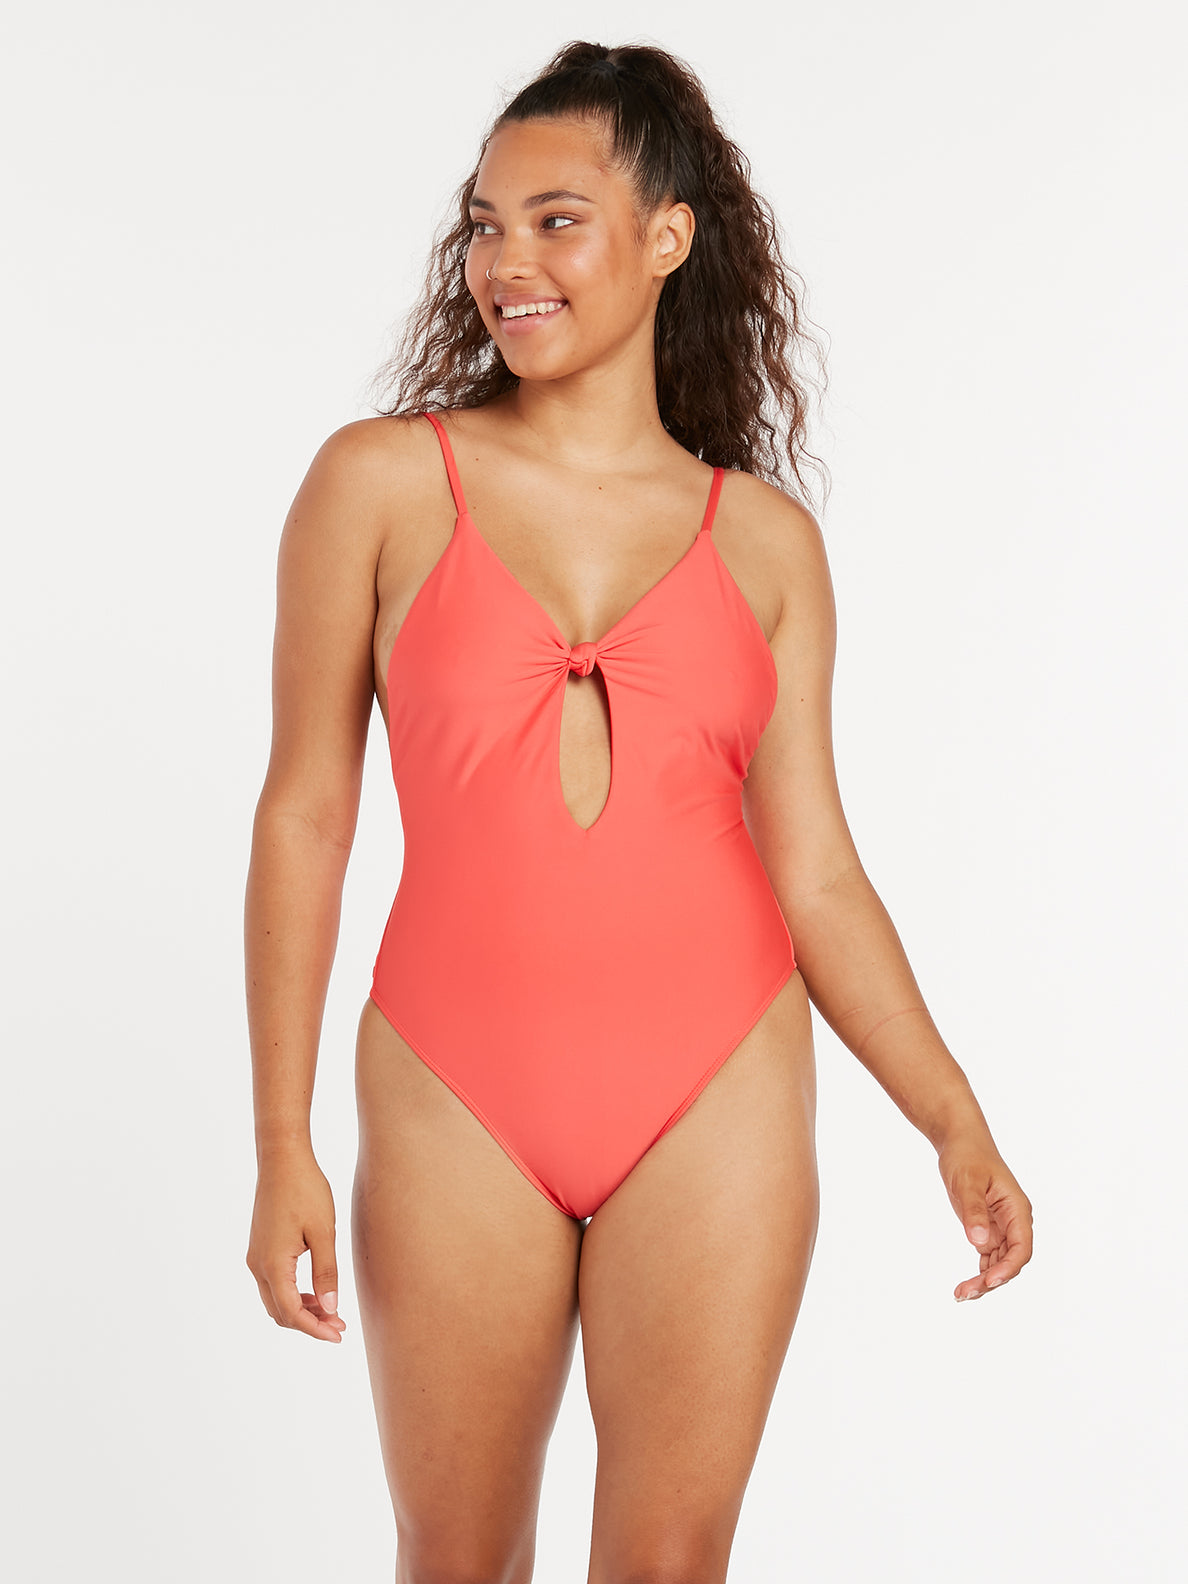 Simply Seamless One Piece - Pistol Punch